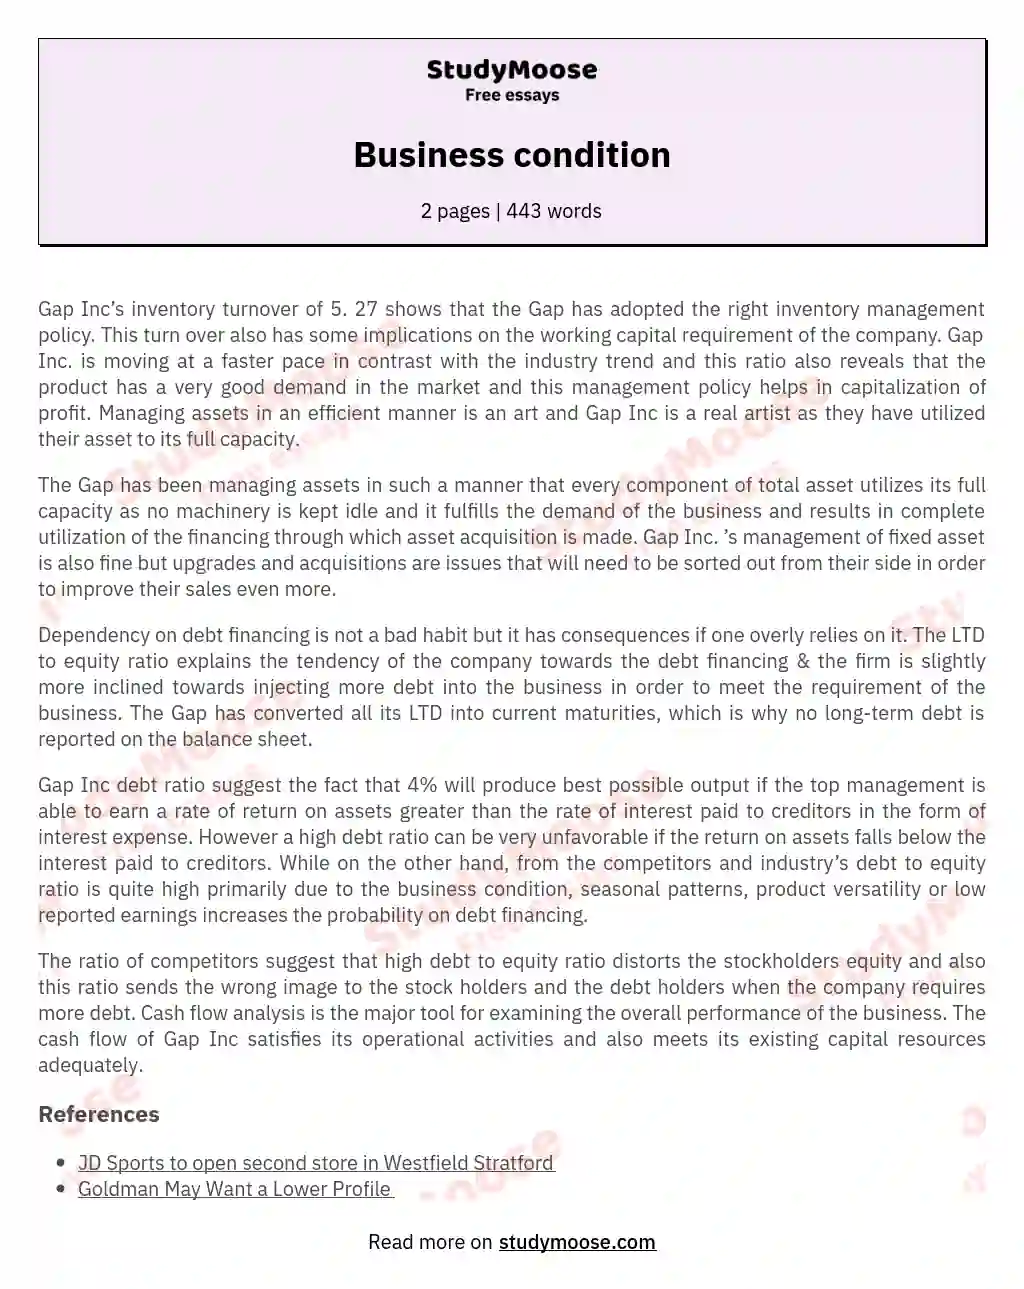 Business condition essay